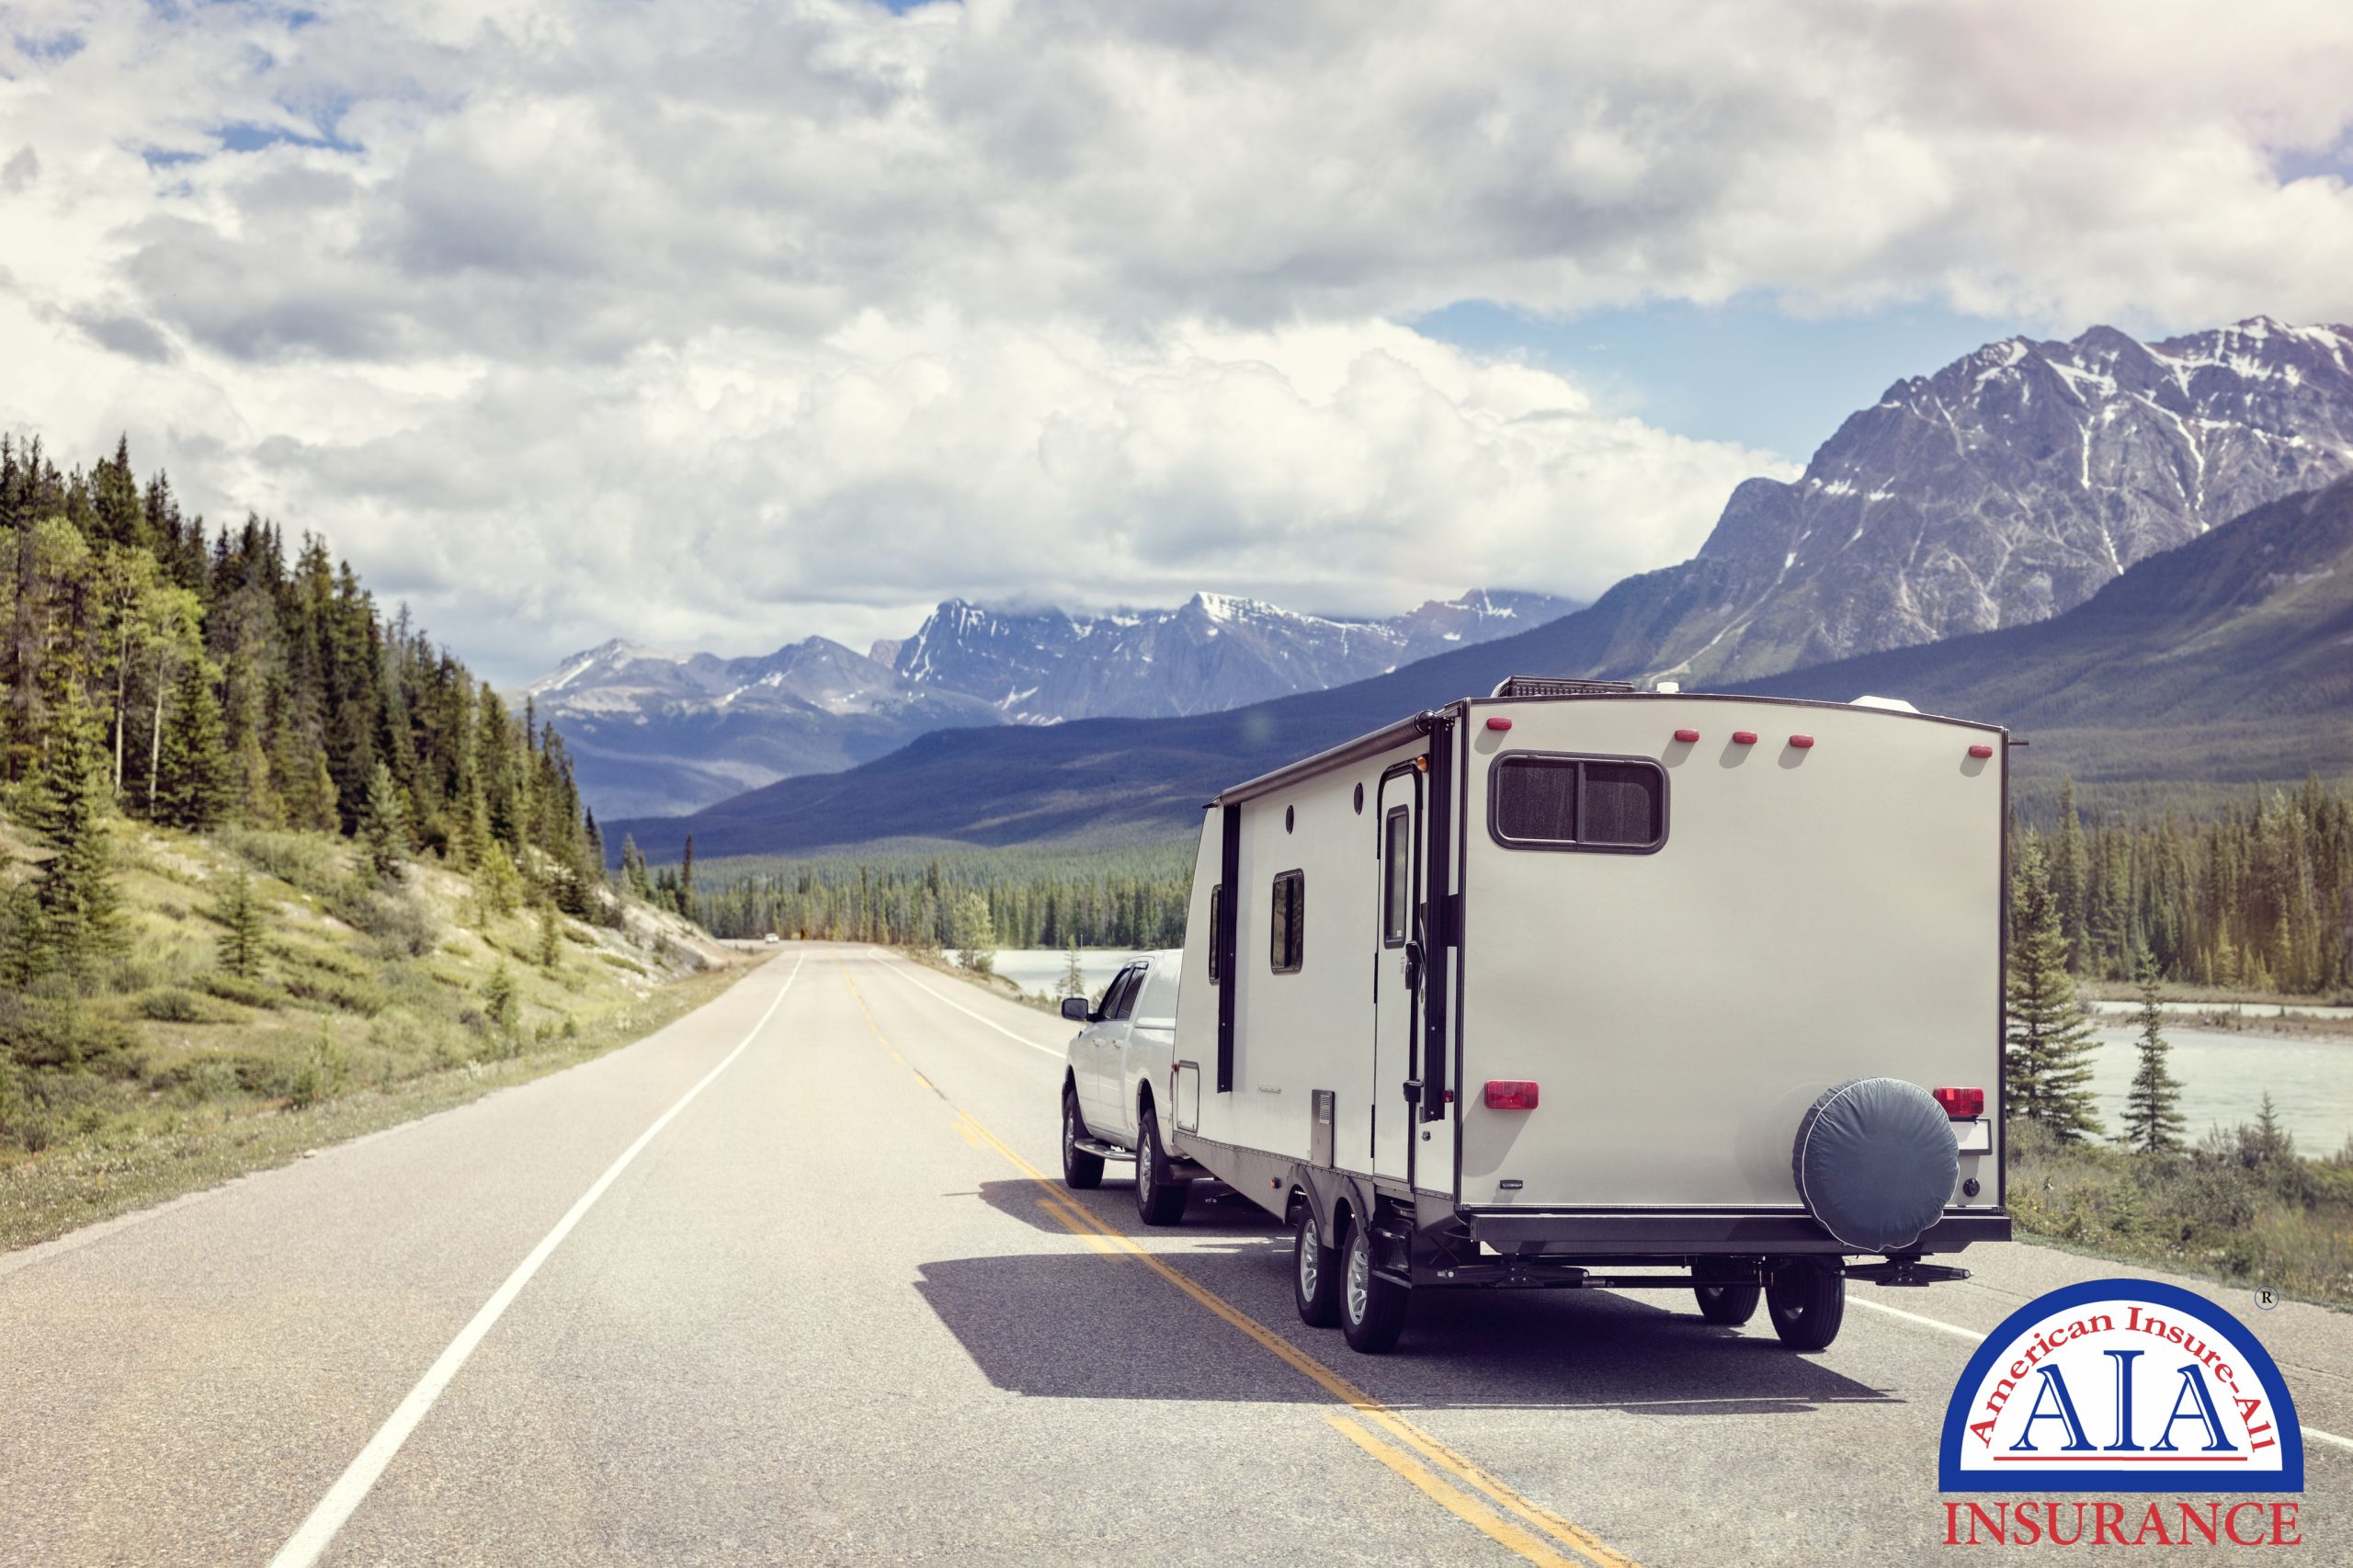 Is There a Reliable RV Insurance Company Near Kirkland?